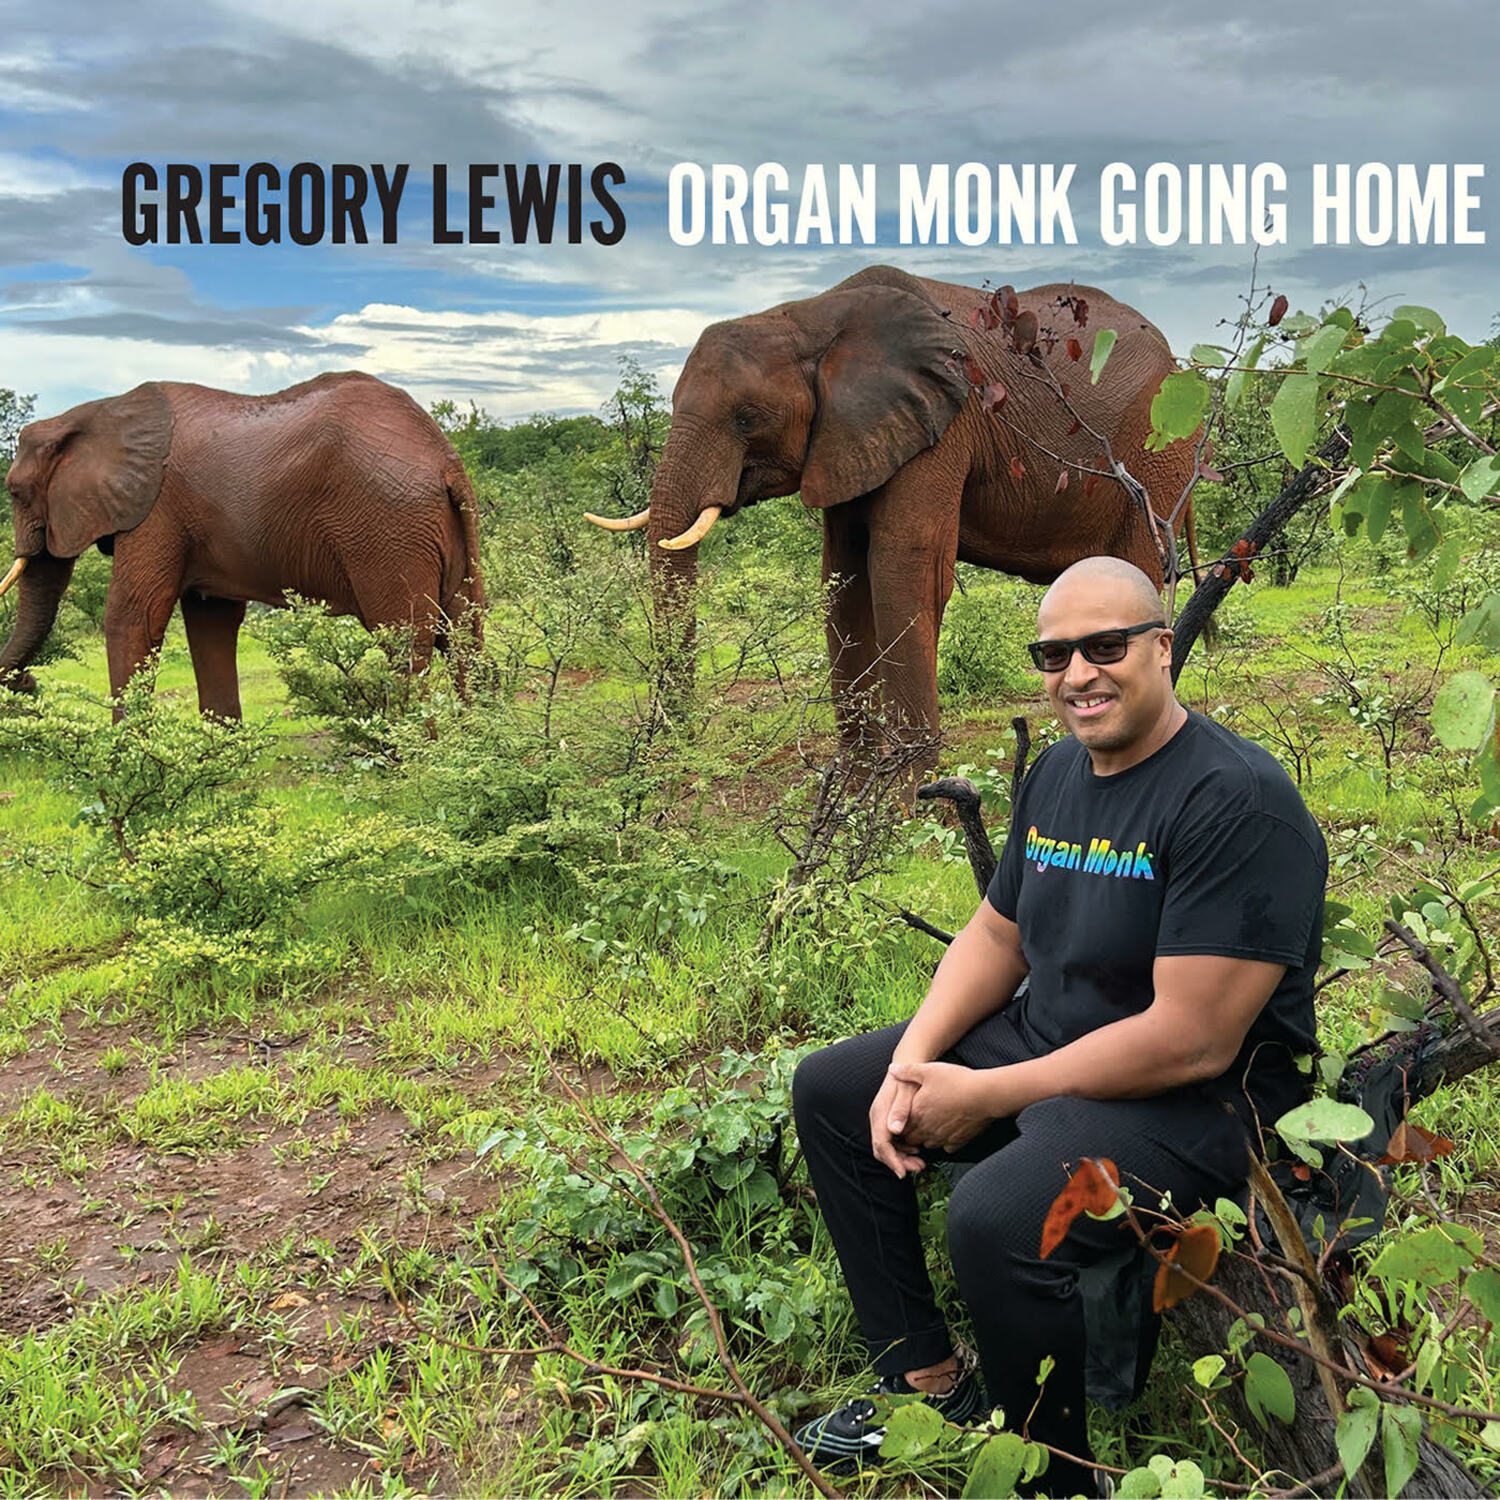 The cover of Gregory Lewis's new album Organ Monk Going Home. COURTESY THE ARTIST